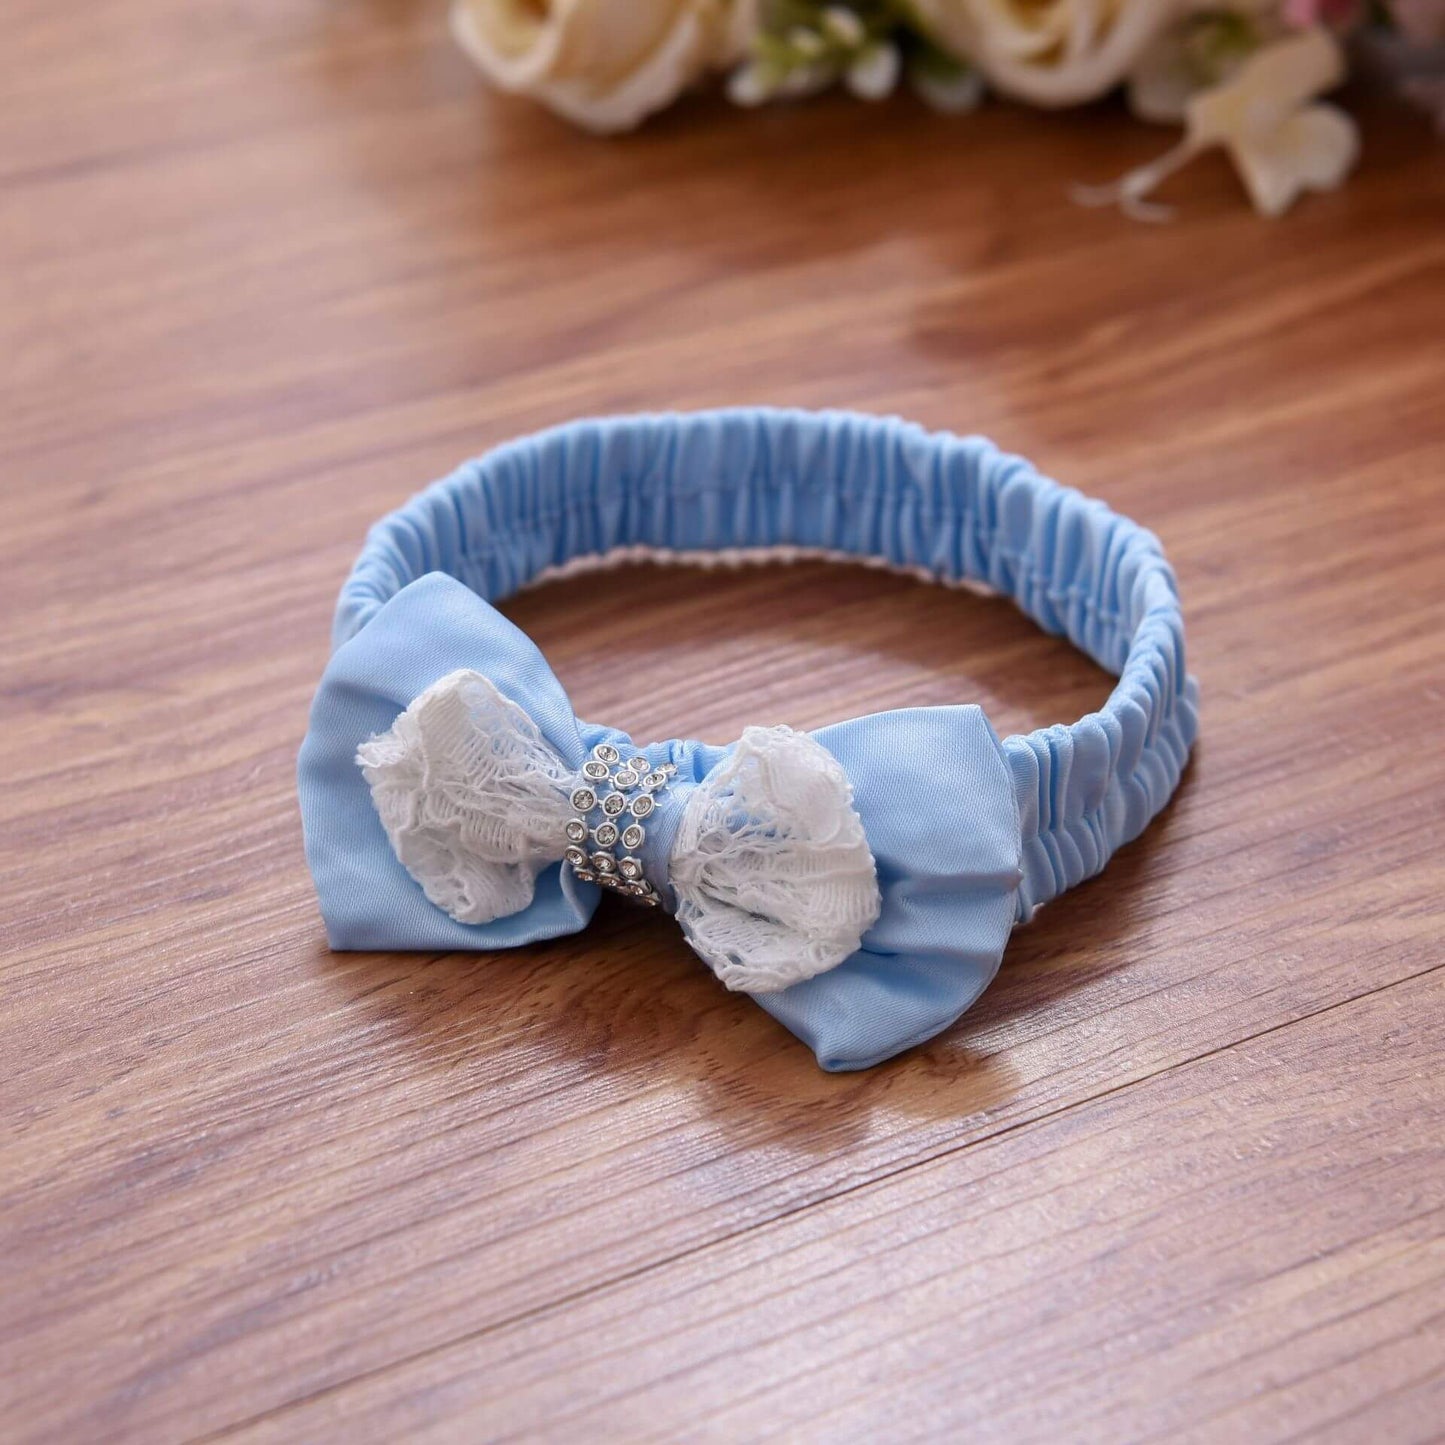 Cute Embroidered Tutu With Big Bow,Pink/Blue,6M to 6T